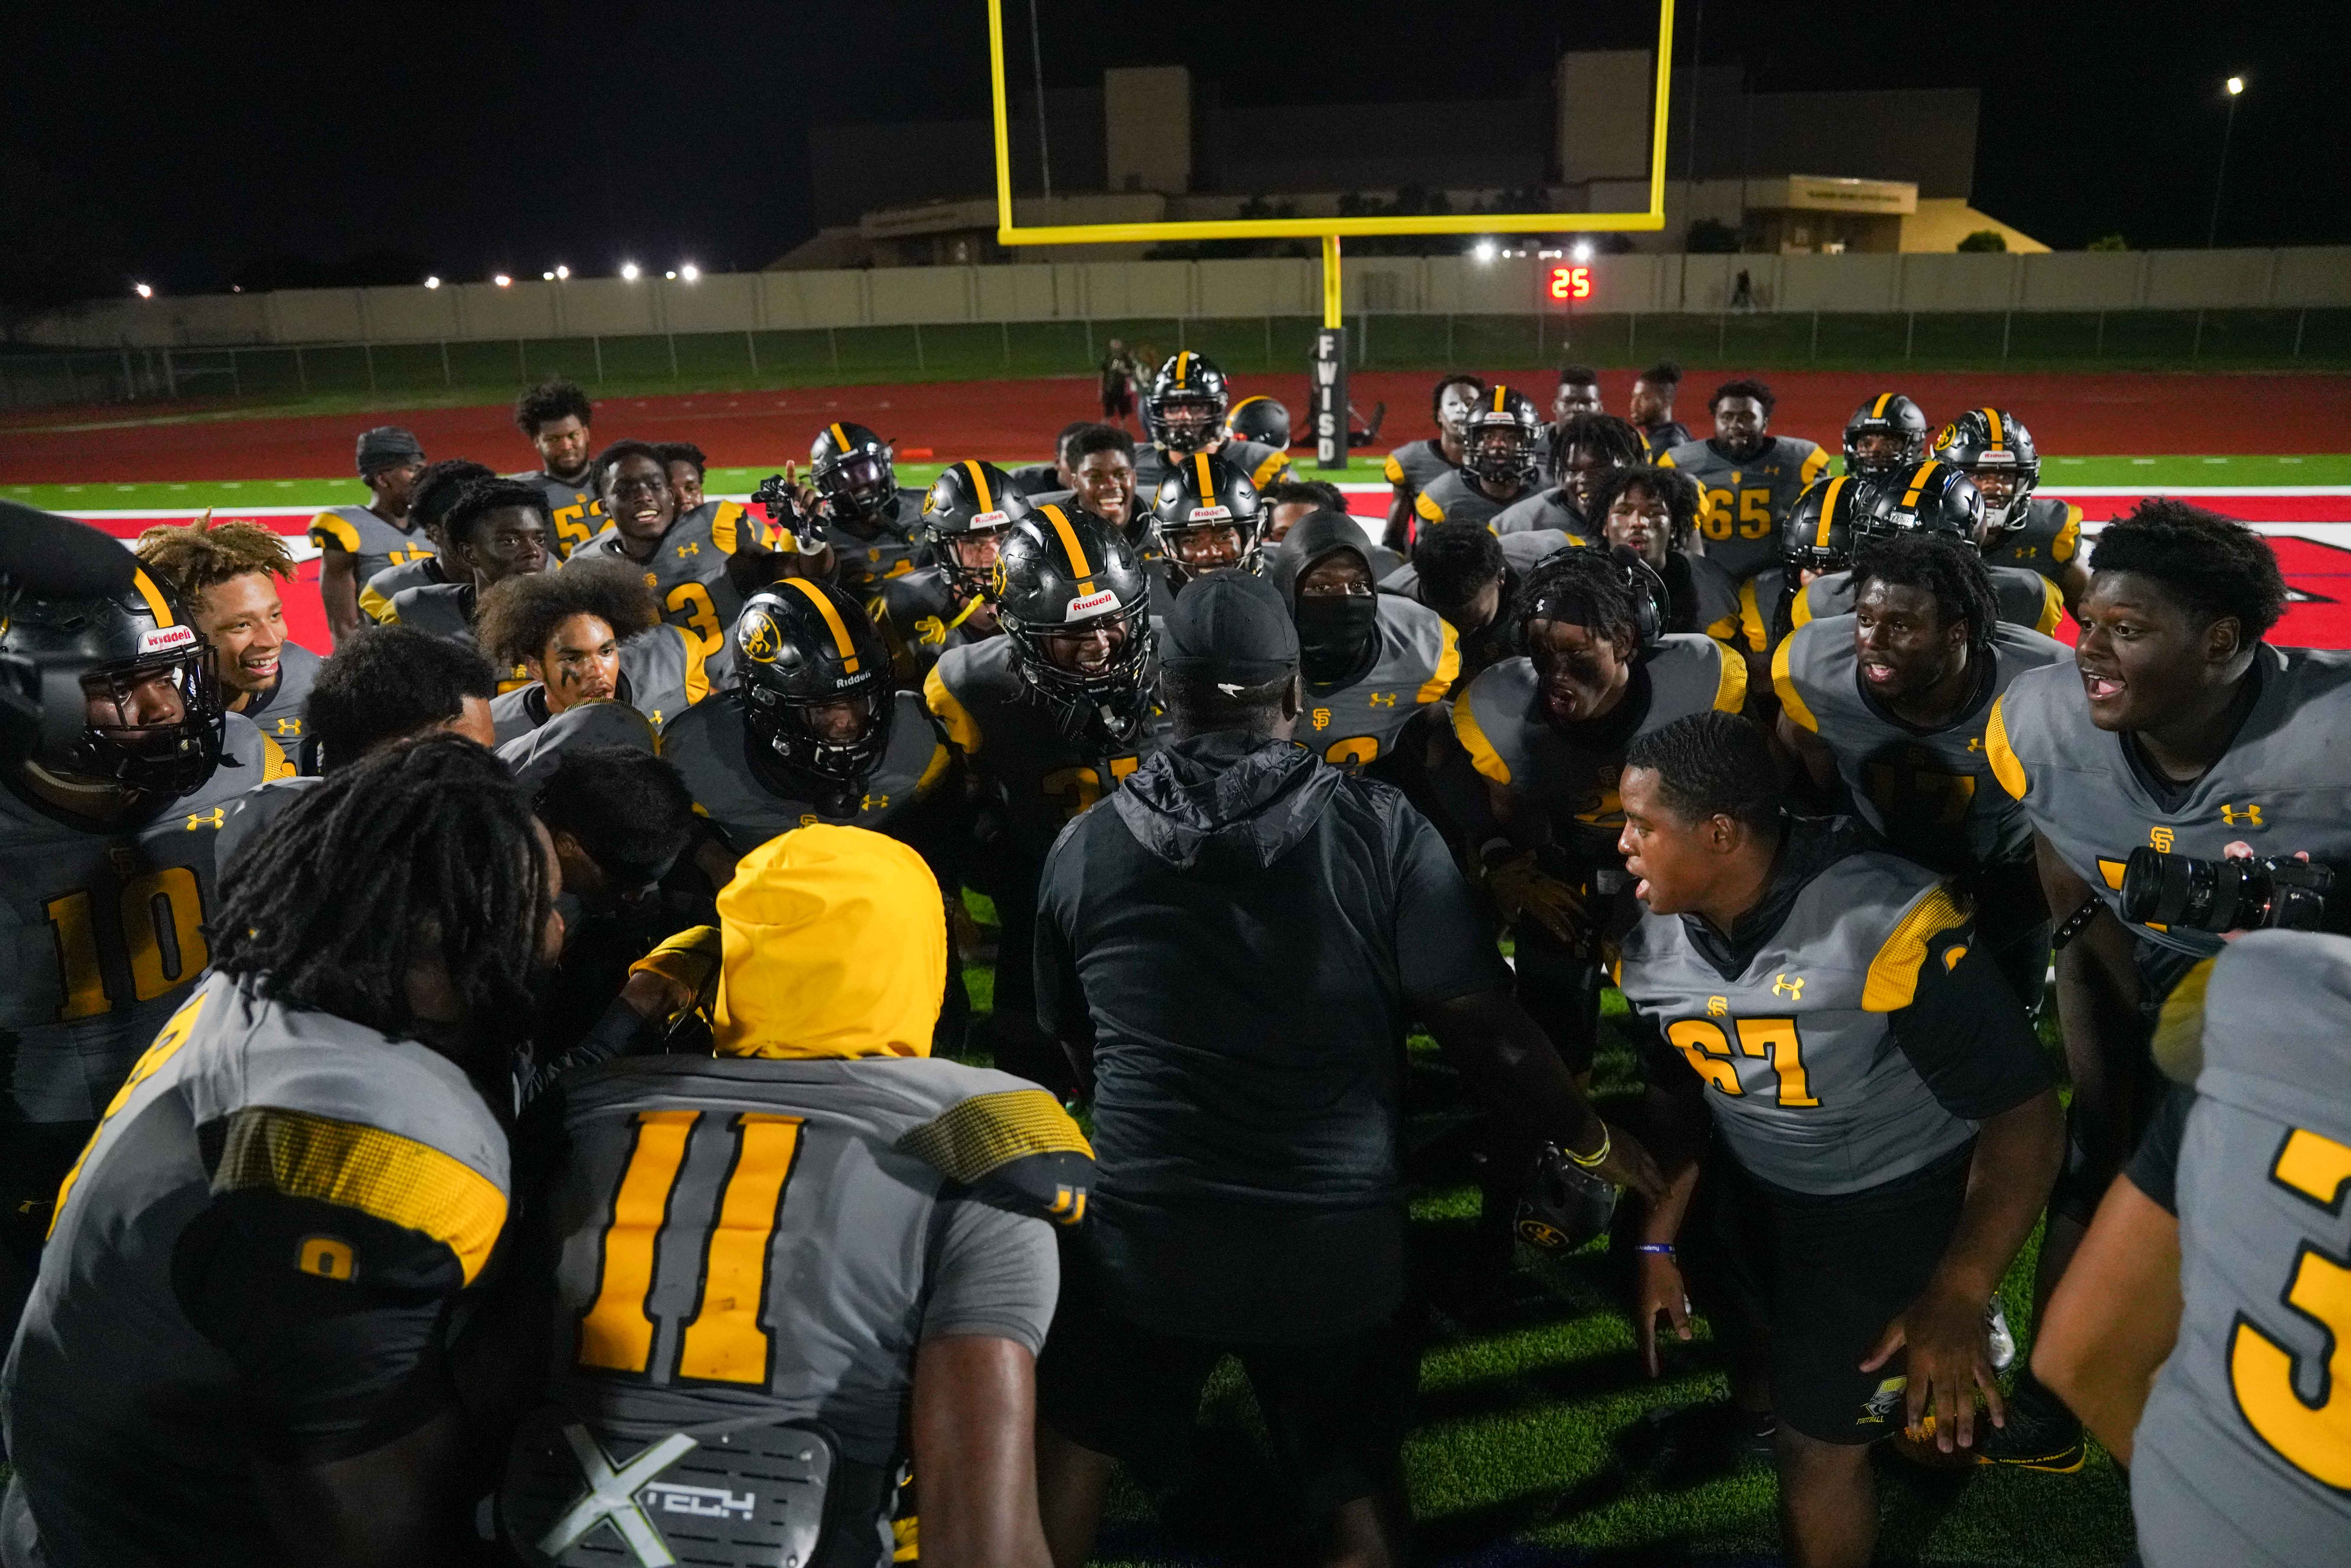 St. Frances Academy visits Dutch Fork in game that could shake up Super 25 rankings